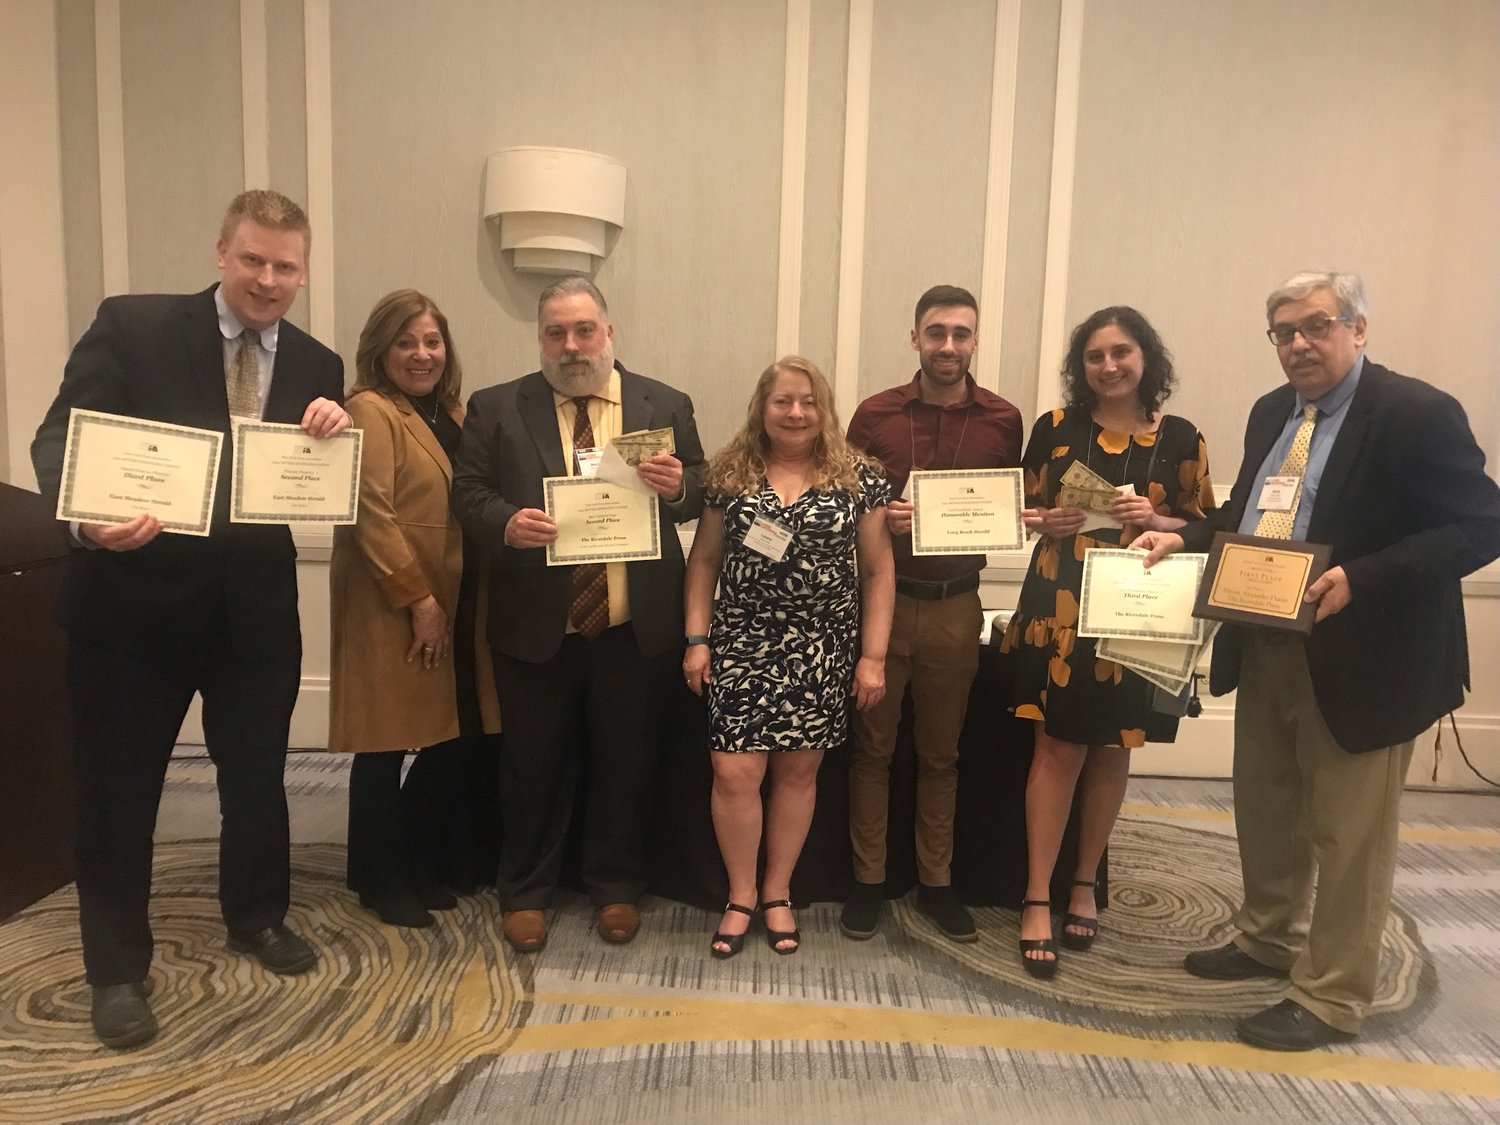 Some of the winners who were in Albany for this weekend's New York Press Association Better Newspaper Contest awards include, from left, photo editor Tim Baker, sales vice president Rhonda Glickman, executive editor Michael Hinman, senior editor Laura Lane, senior reporter Brendan Carpenter, senior reporter Ana Borruto and Riverdale Press editor Gary Larkin.